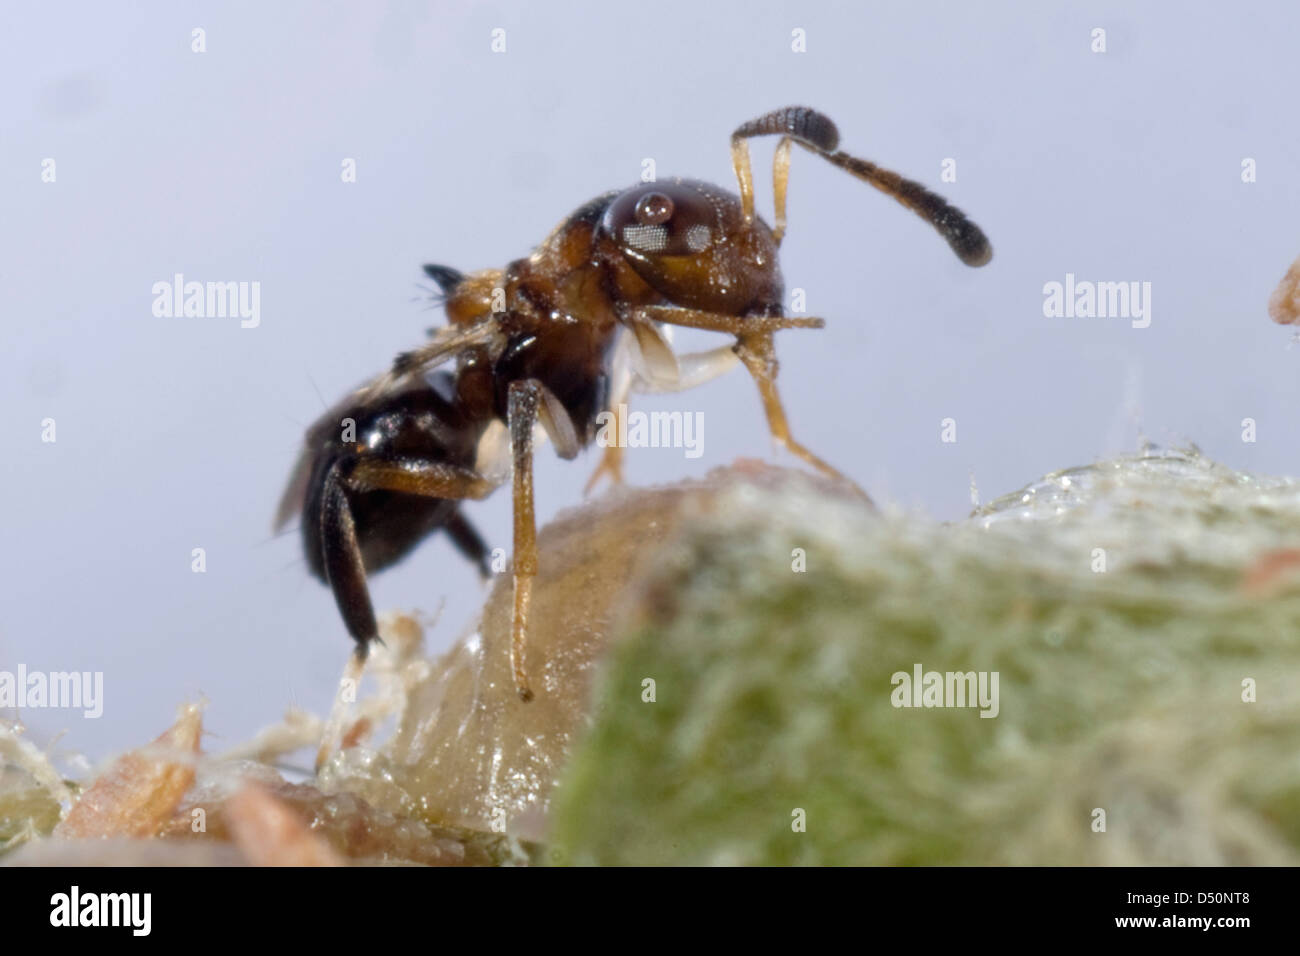 Parasitoid wasp, Encyrtus infelix, commercial biological control parasitoid with scale insect host pests in protected crops Stock Photo